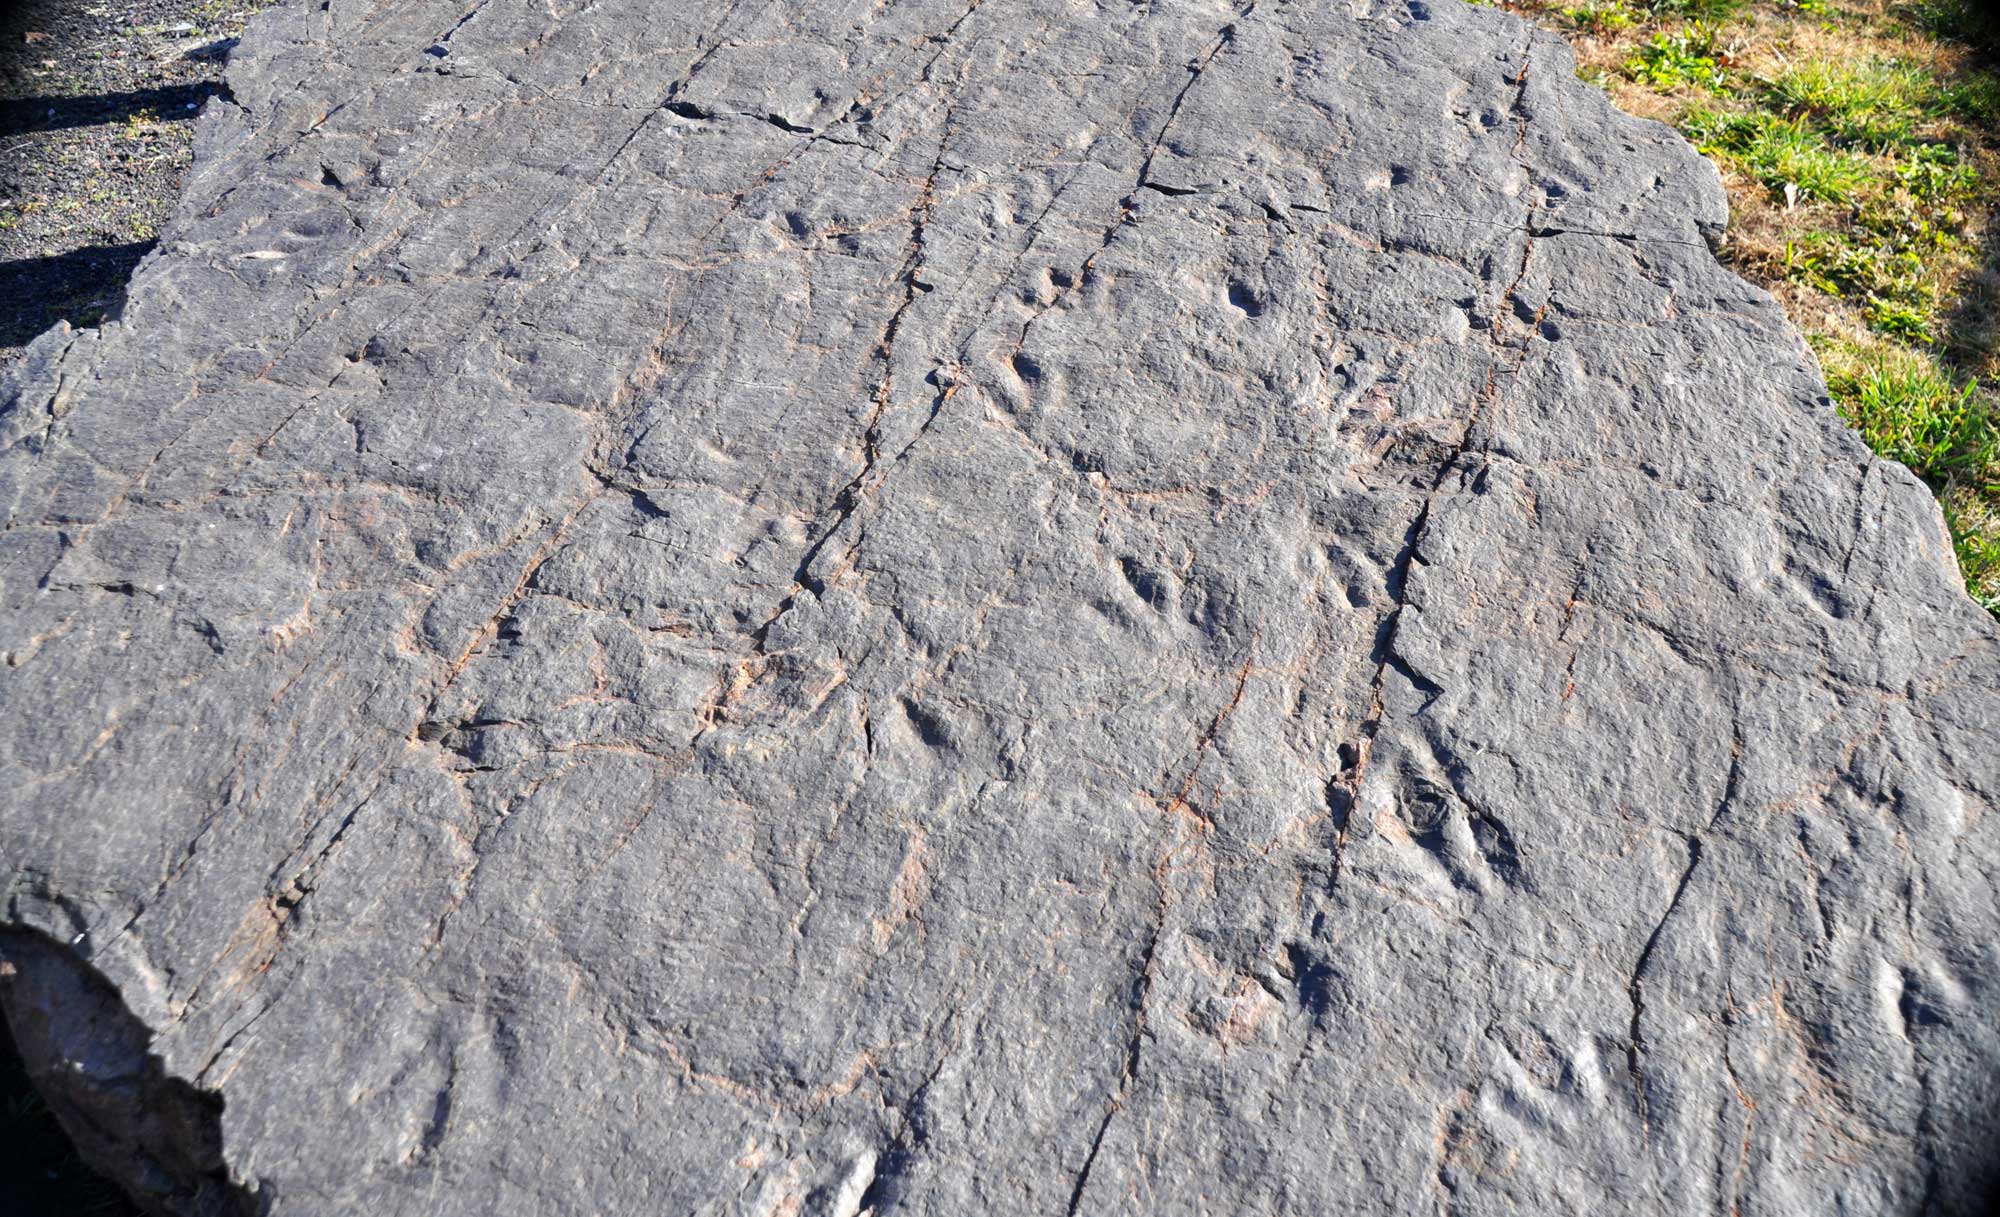 Photo of a large rock slab with three-toed dinosaur footprints pointed in various directions.